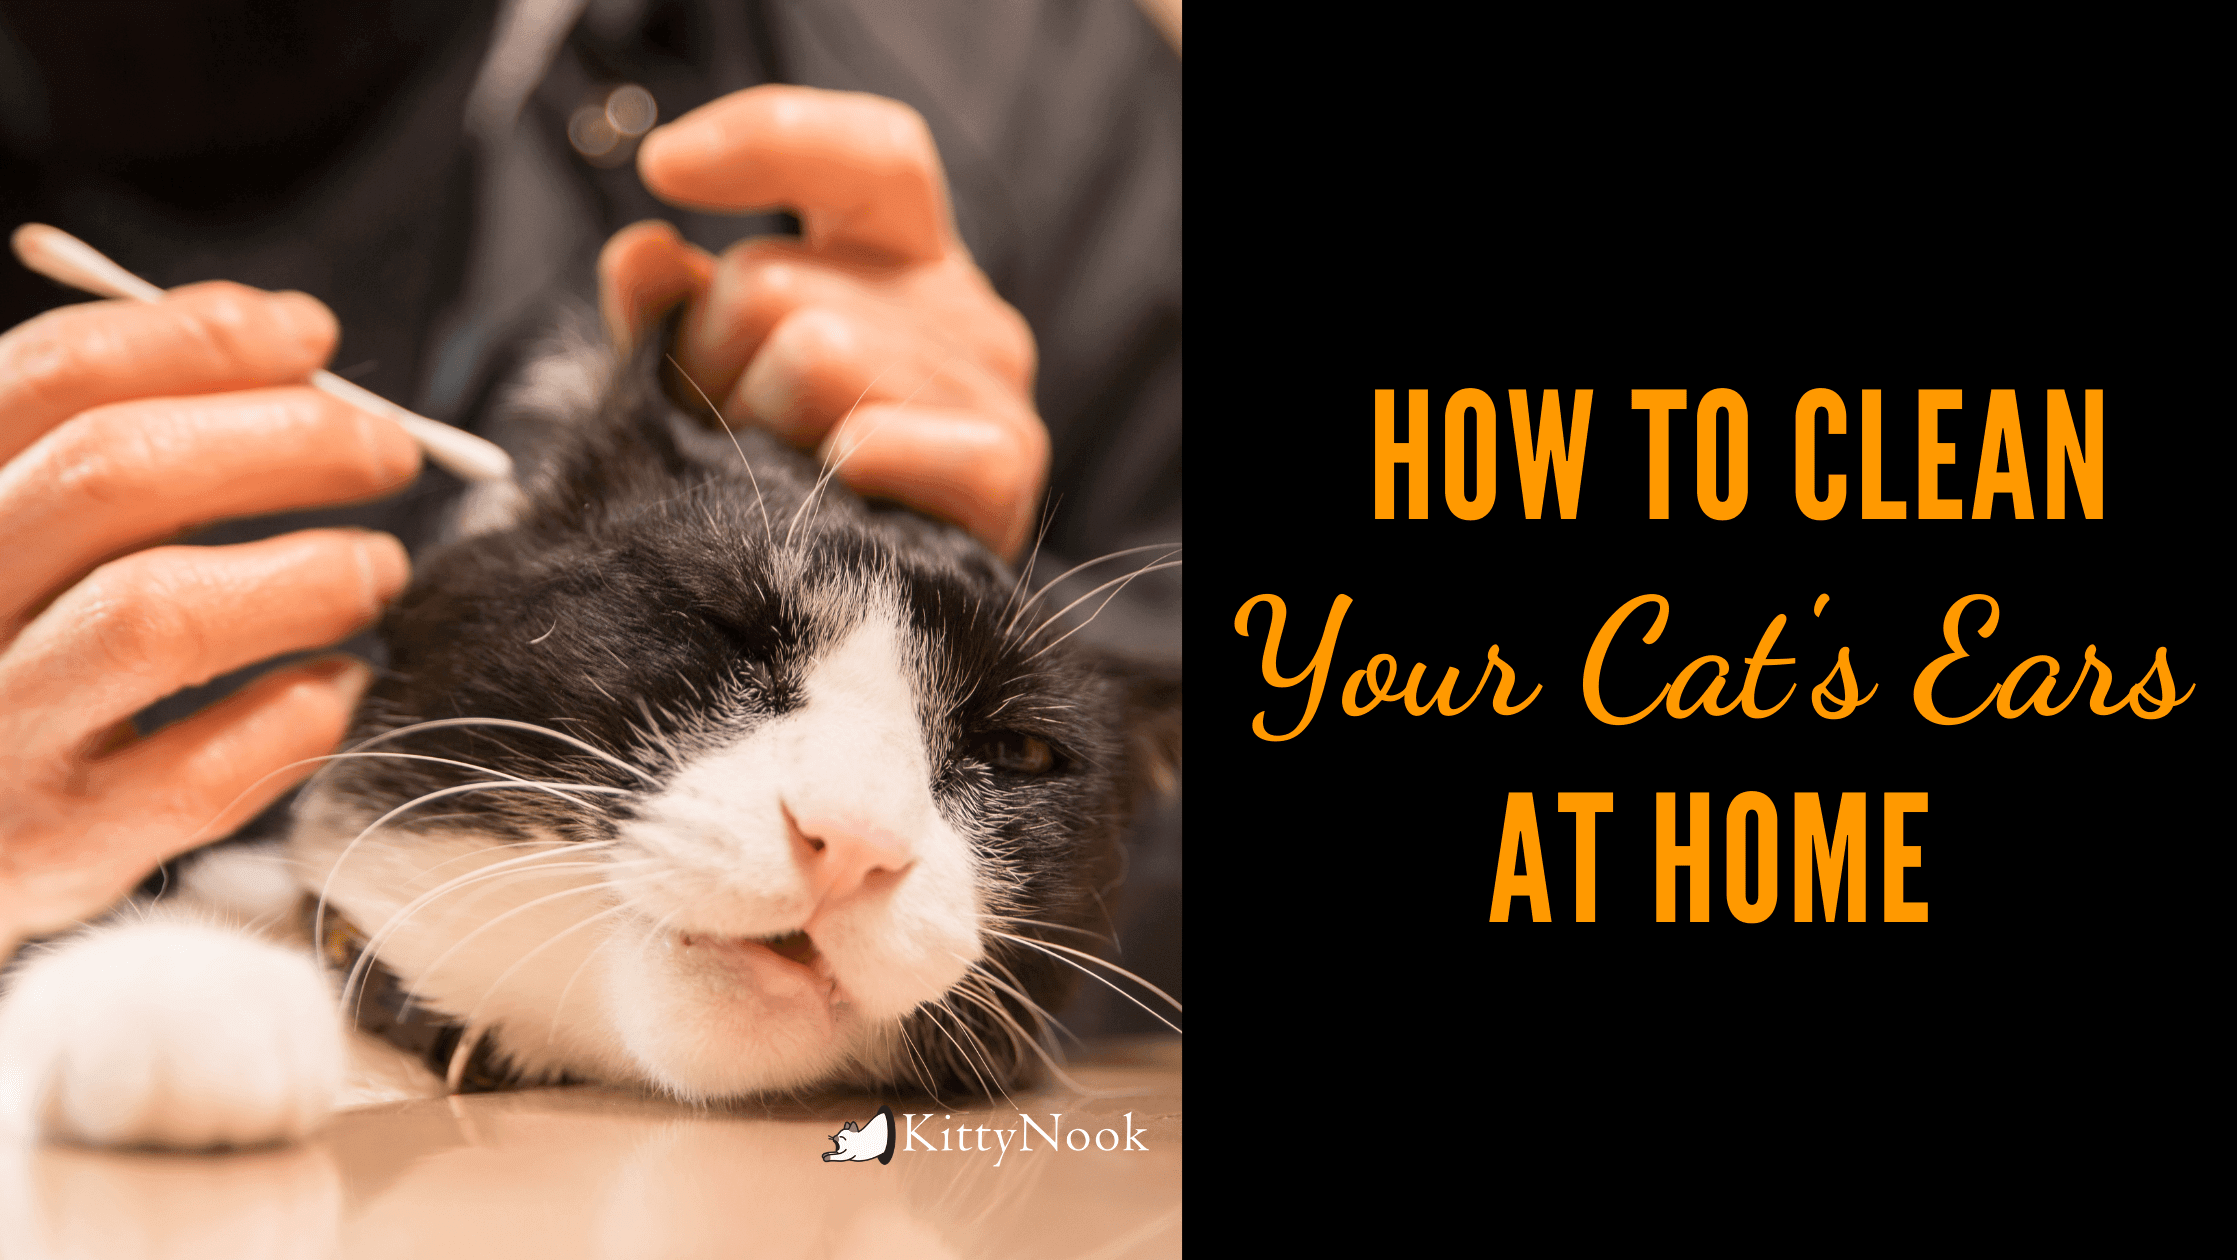 How To Clean Your Cat's Ears At Home - KittyNook